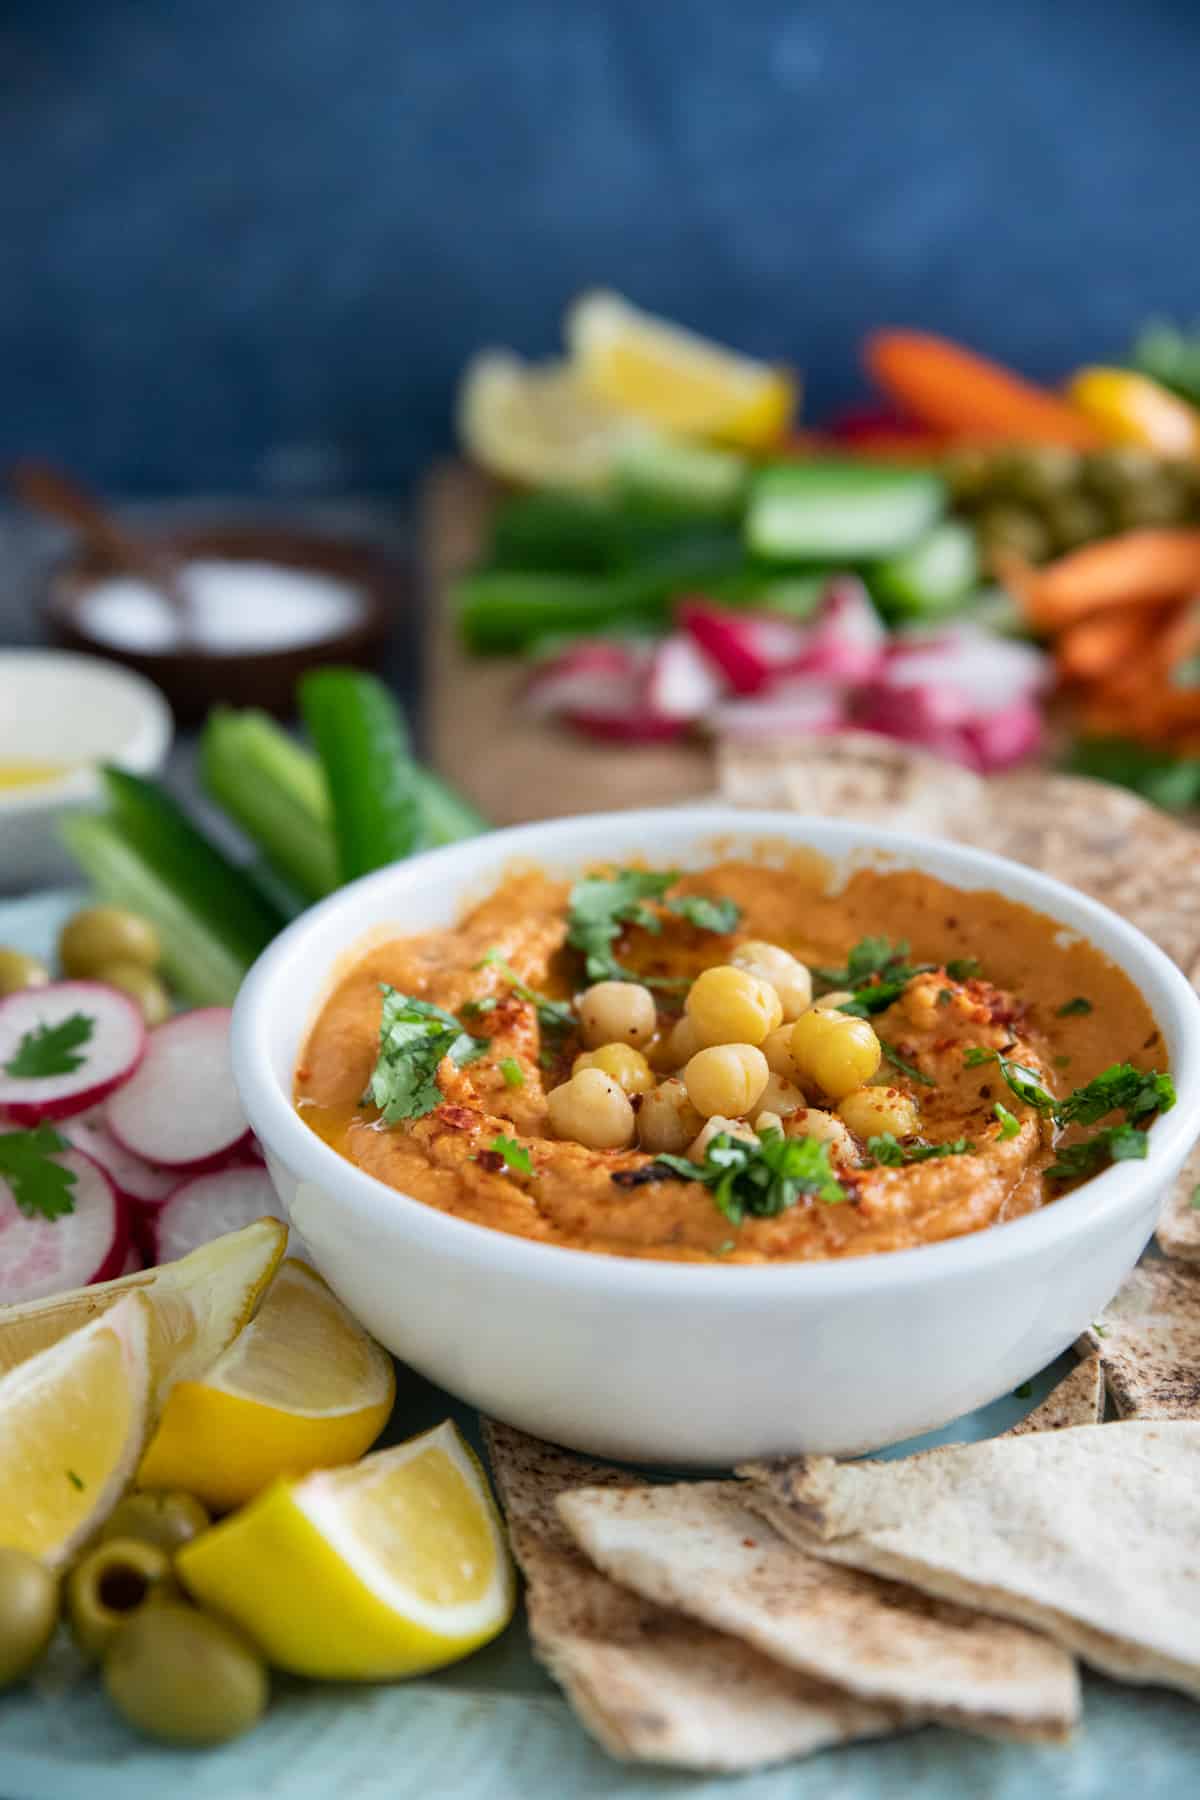 Roasted red pepper hummus is easy and has a nice flavor. The sweetness of roasted red peppers combined with tahini, chickpeas and lemon juice makes a tasty hummus that's perfect for a mezze spread.
